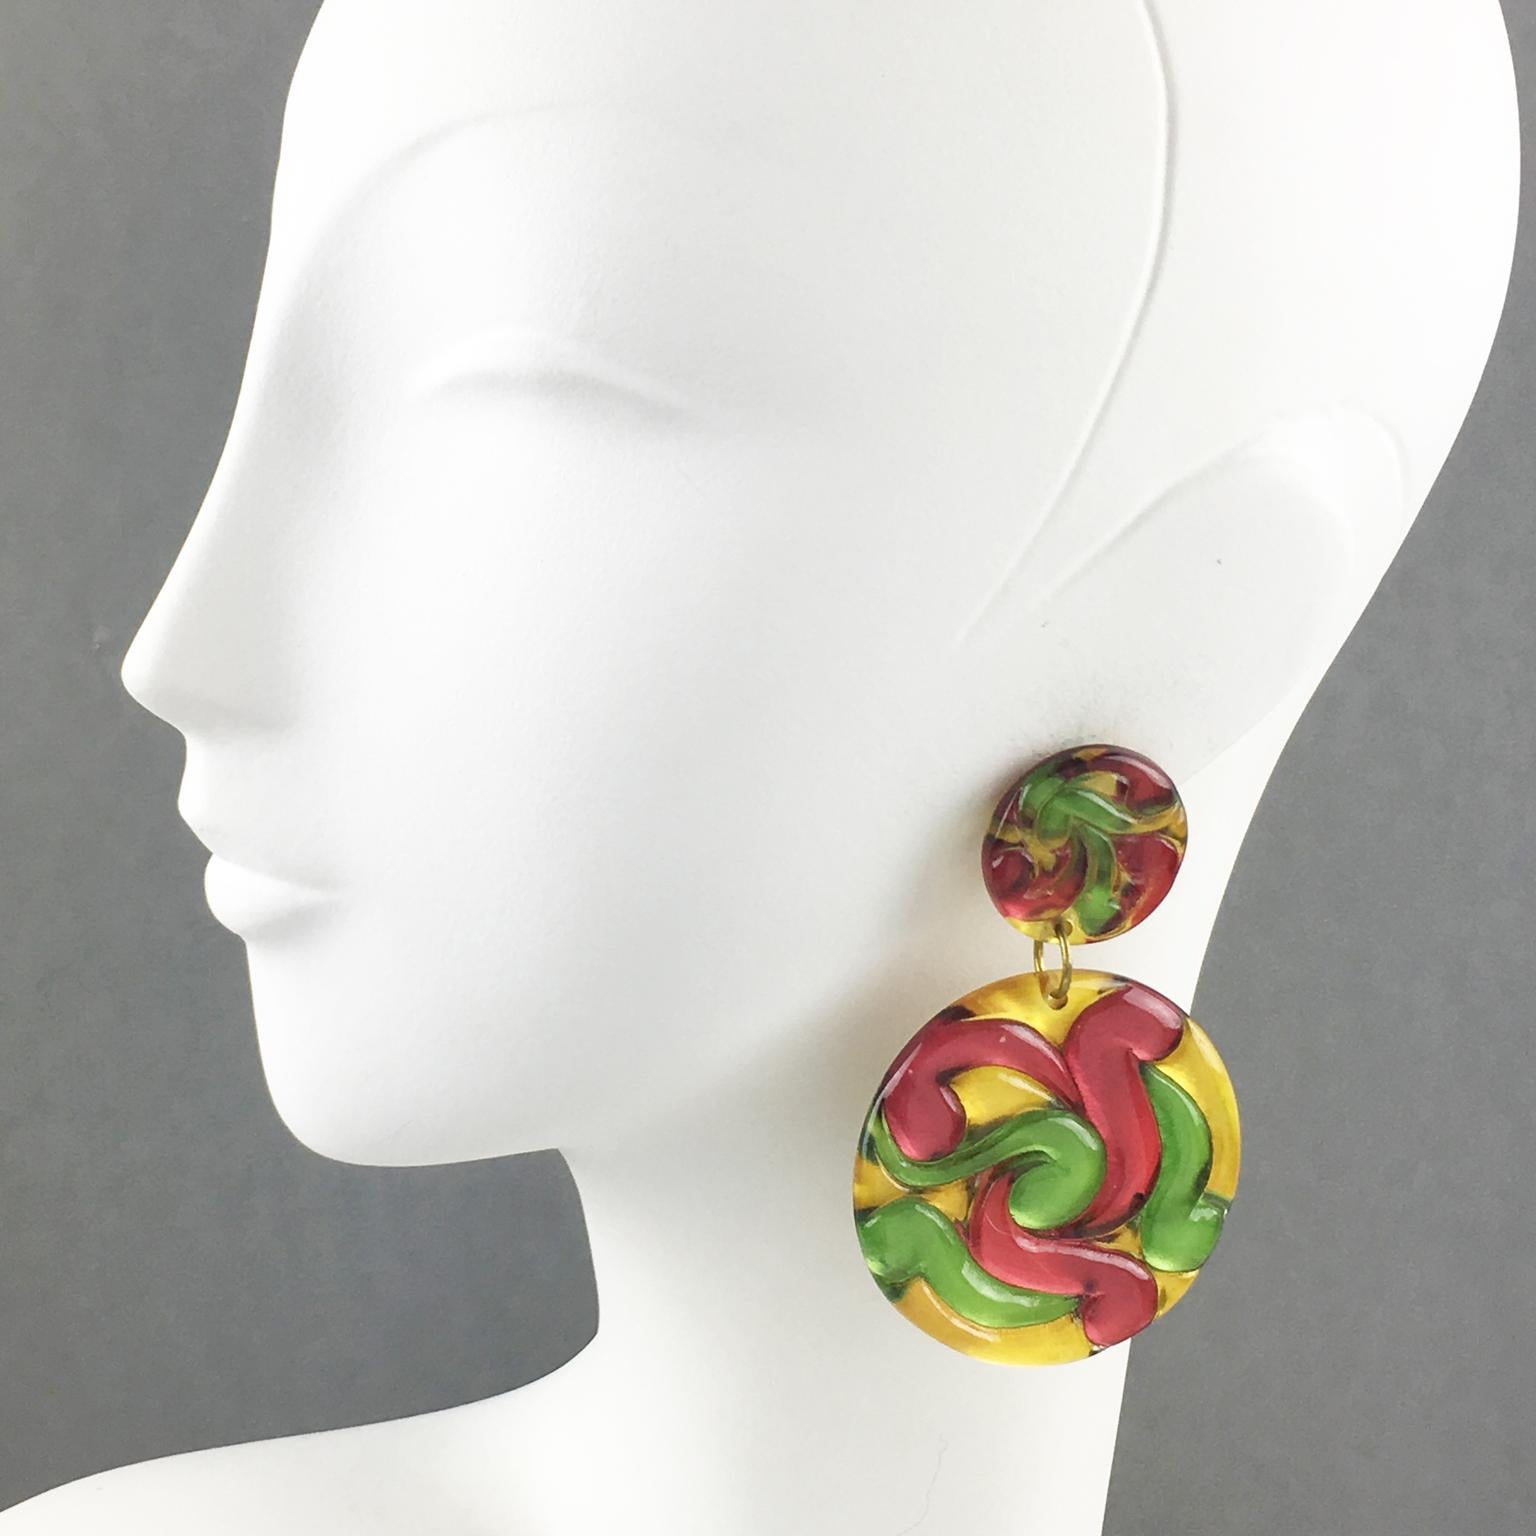 Lovely oversized Lucite clip-on earrings. Huge disk dangling shape featuring dimensional carving with multicolor swirling. Assorted paint colors of yellow mustard, apple green, and raspberry red. There is no visible maker's mark.
Measurements: 3.19